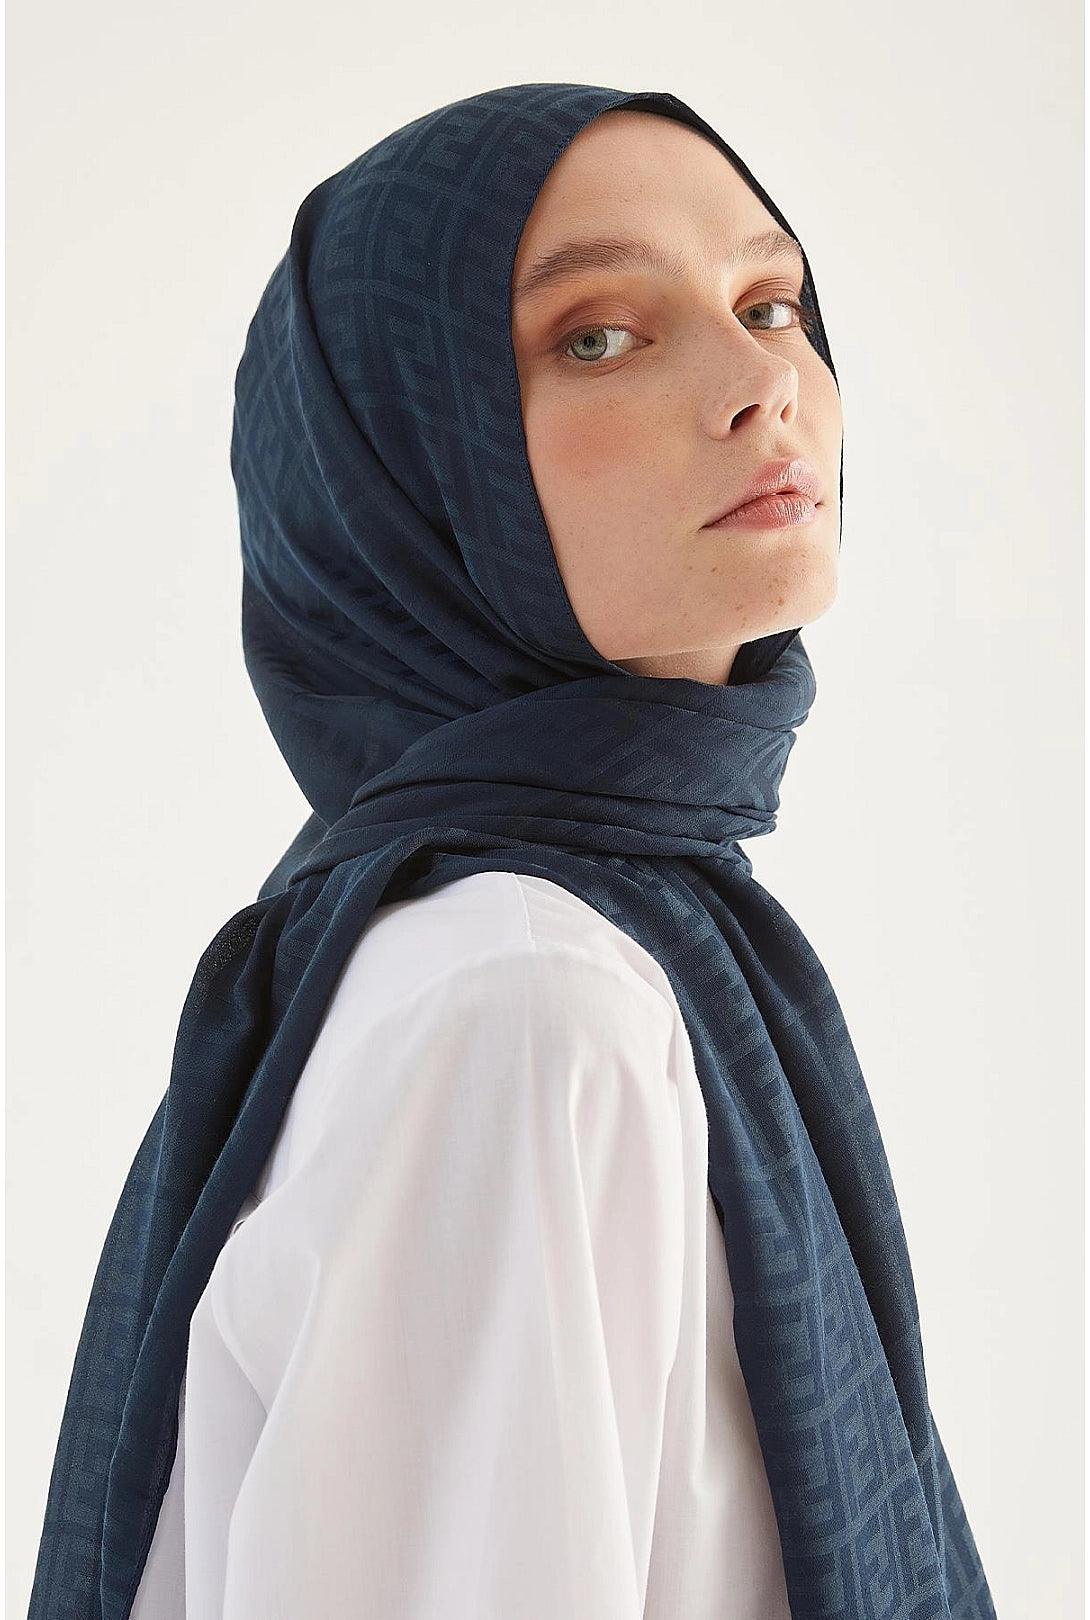 Cotton Hijab Scarf Shawl with Patterns - Navy Blue